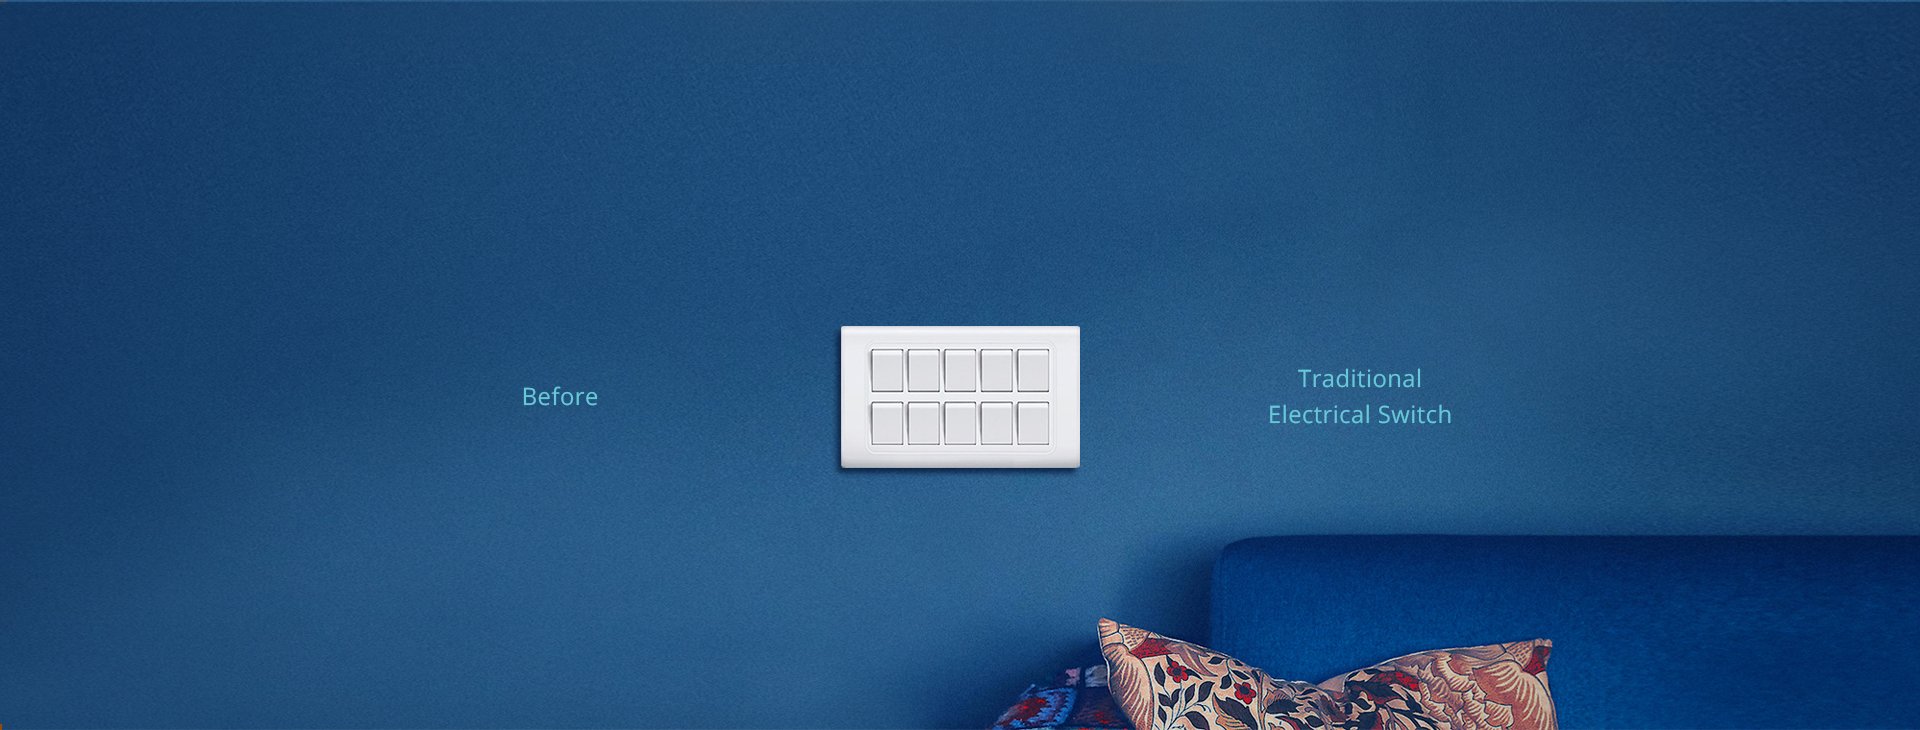 Designer Home Automation Switch